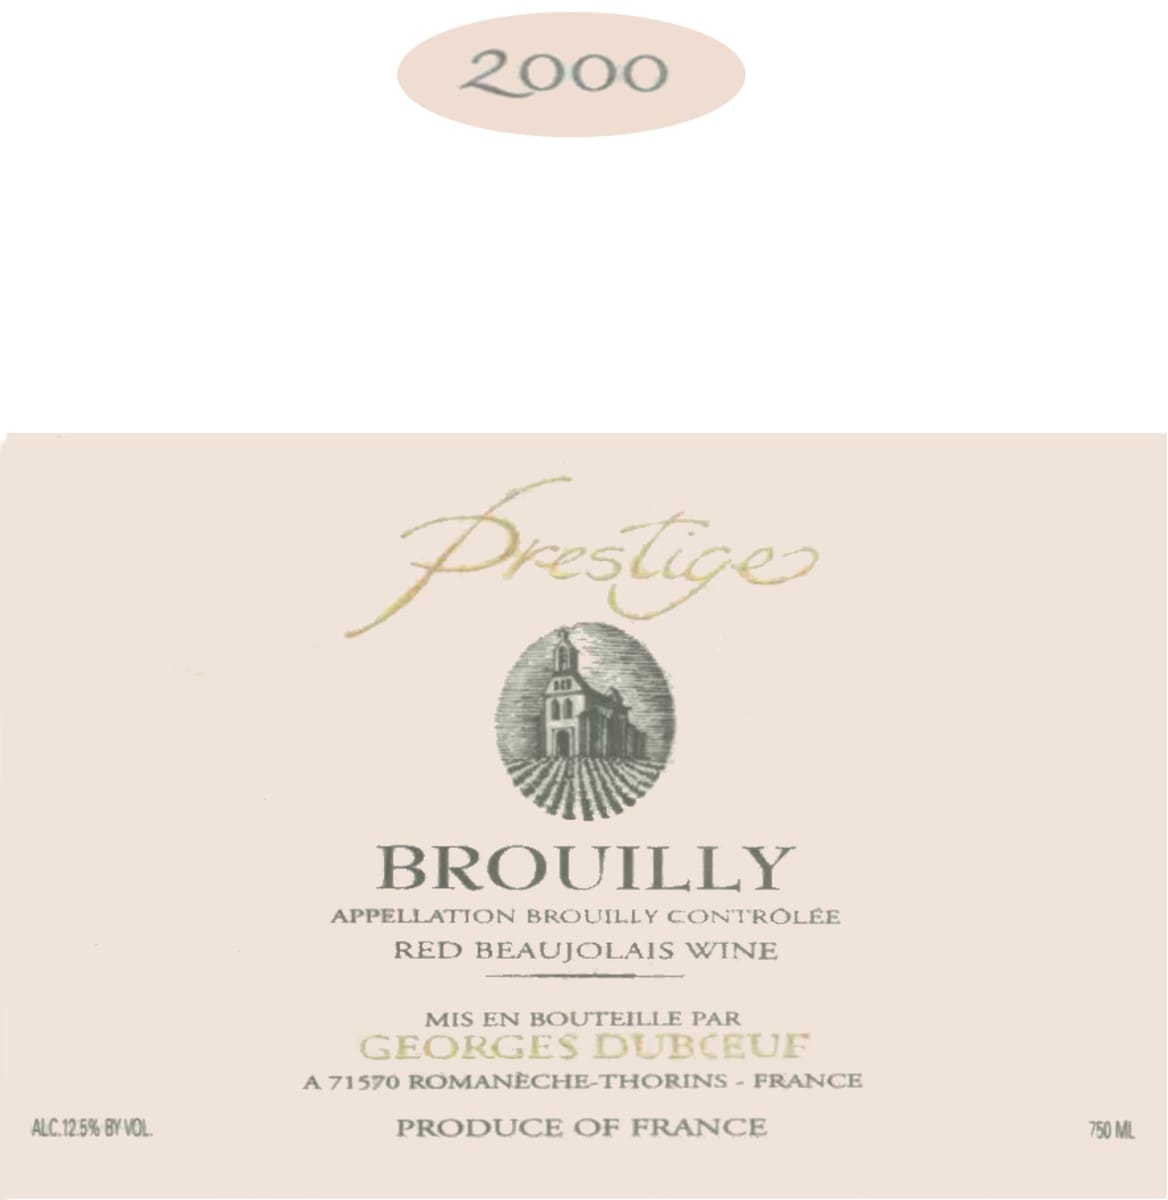 Duboeuf Brouilly Prestige 2000  Front Label